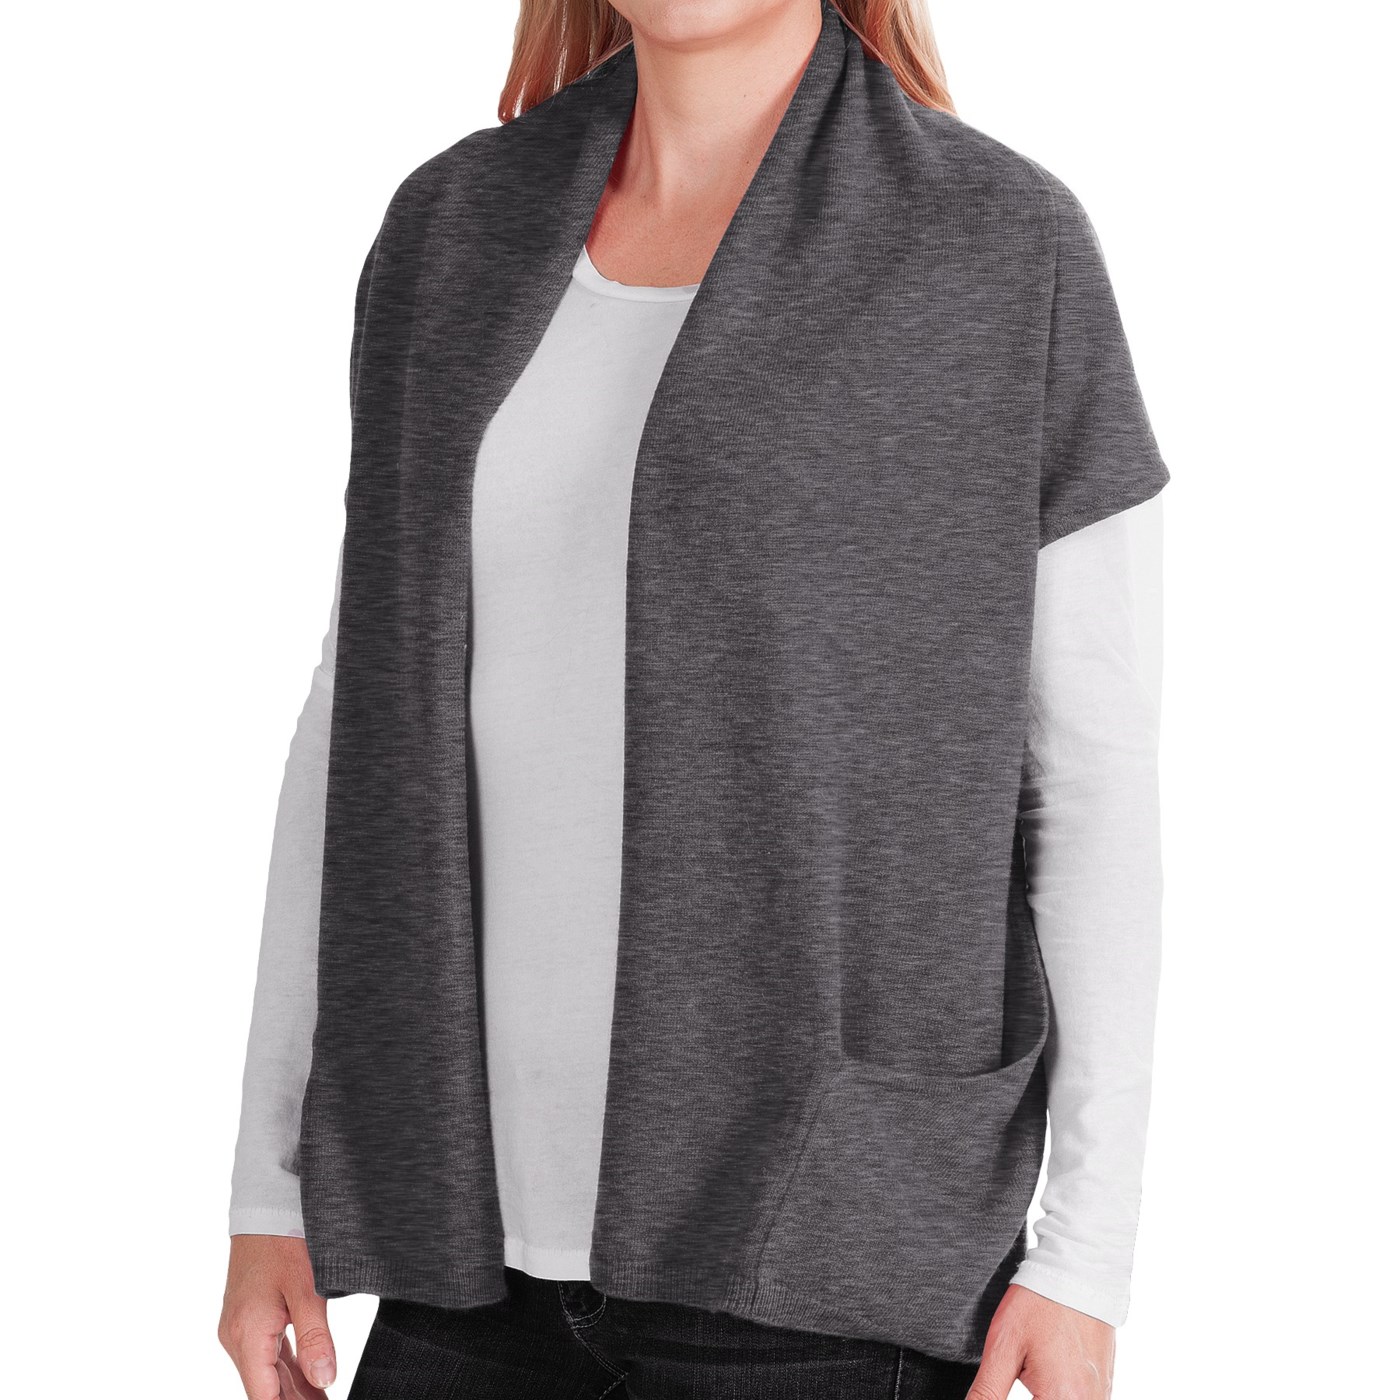 In Cashmere Double Layered Open Vest (For Women) 82